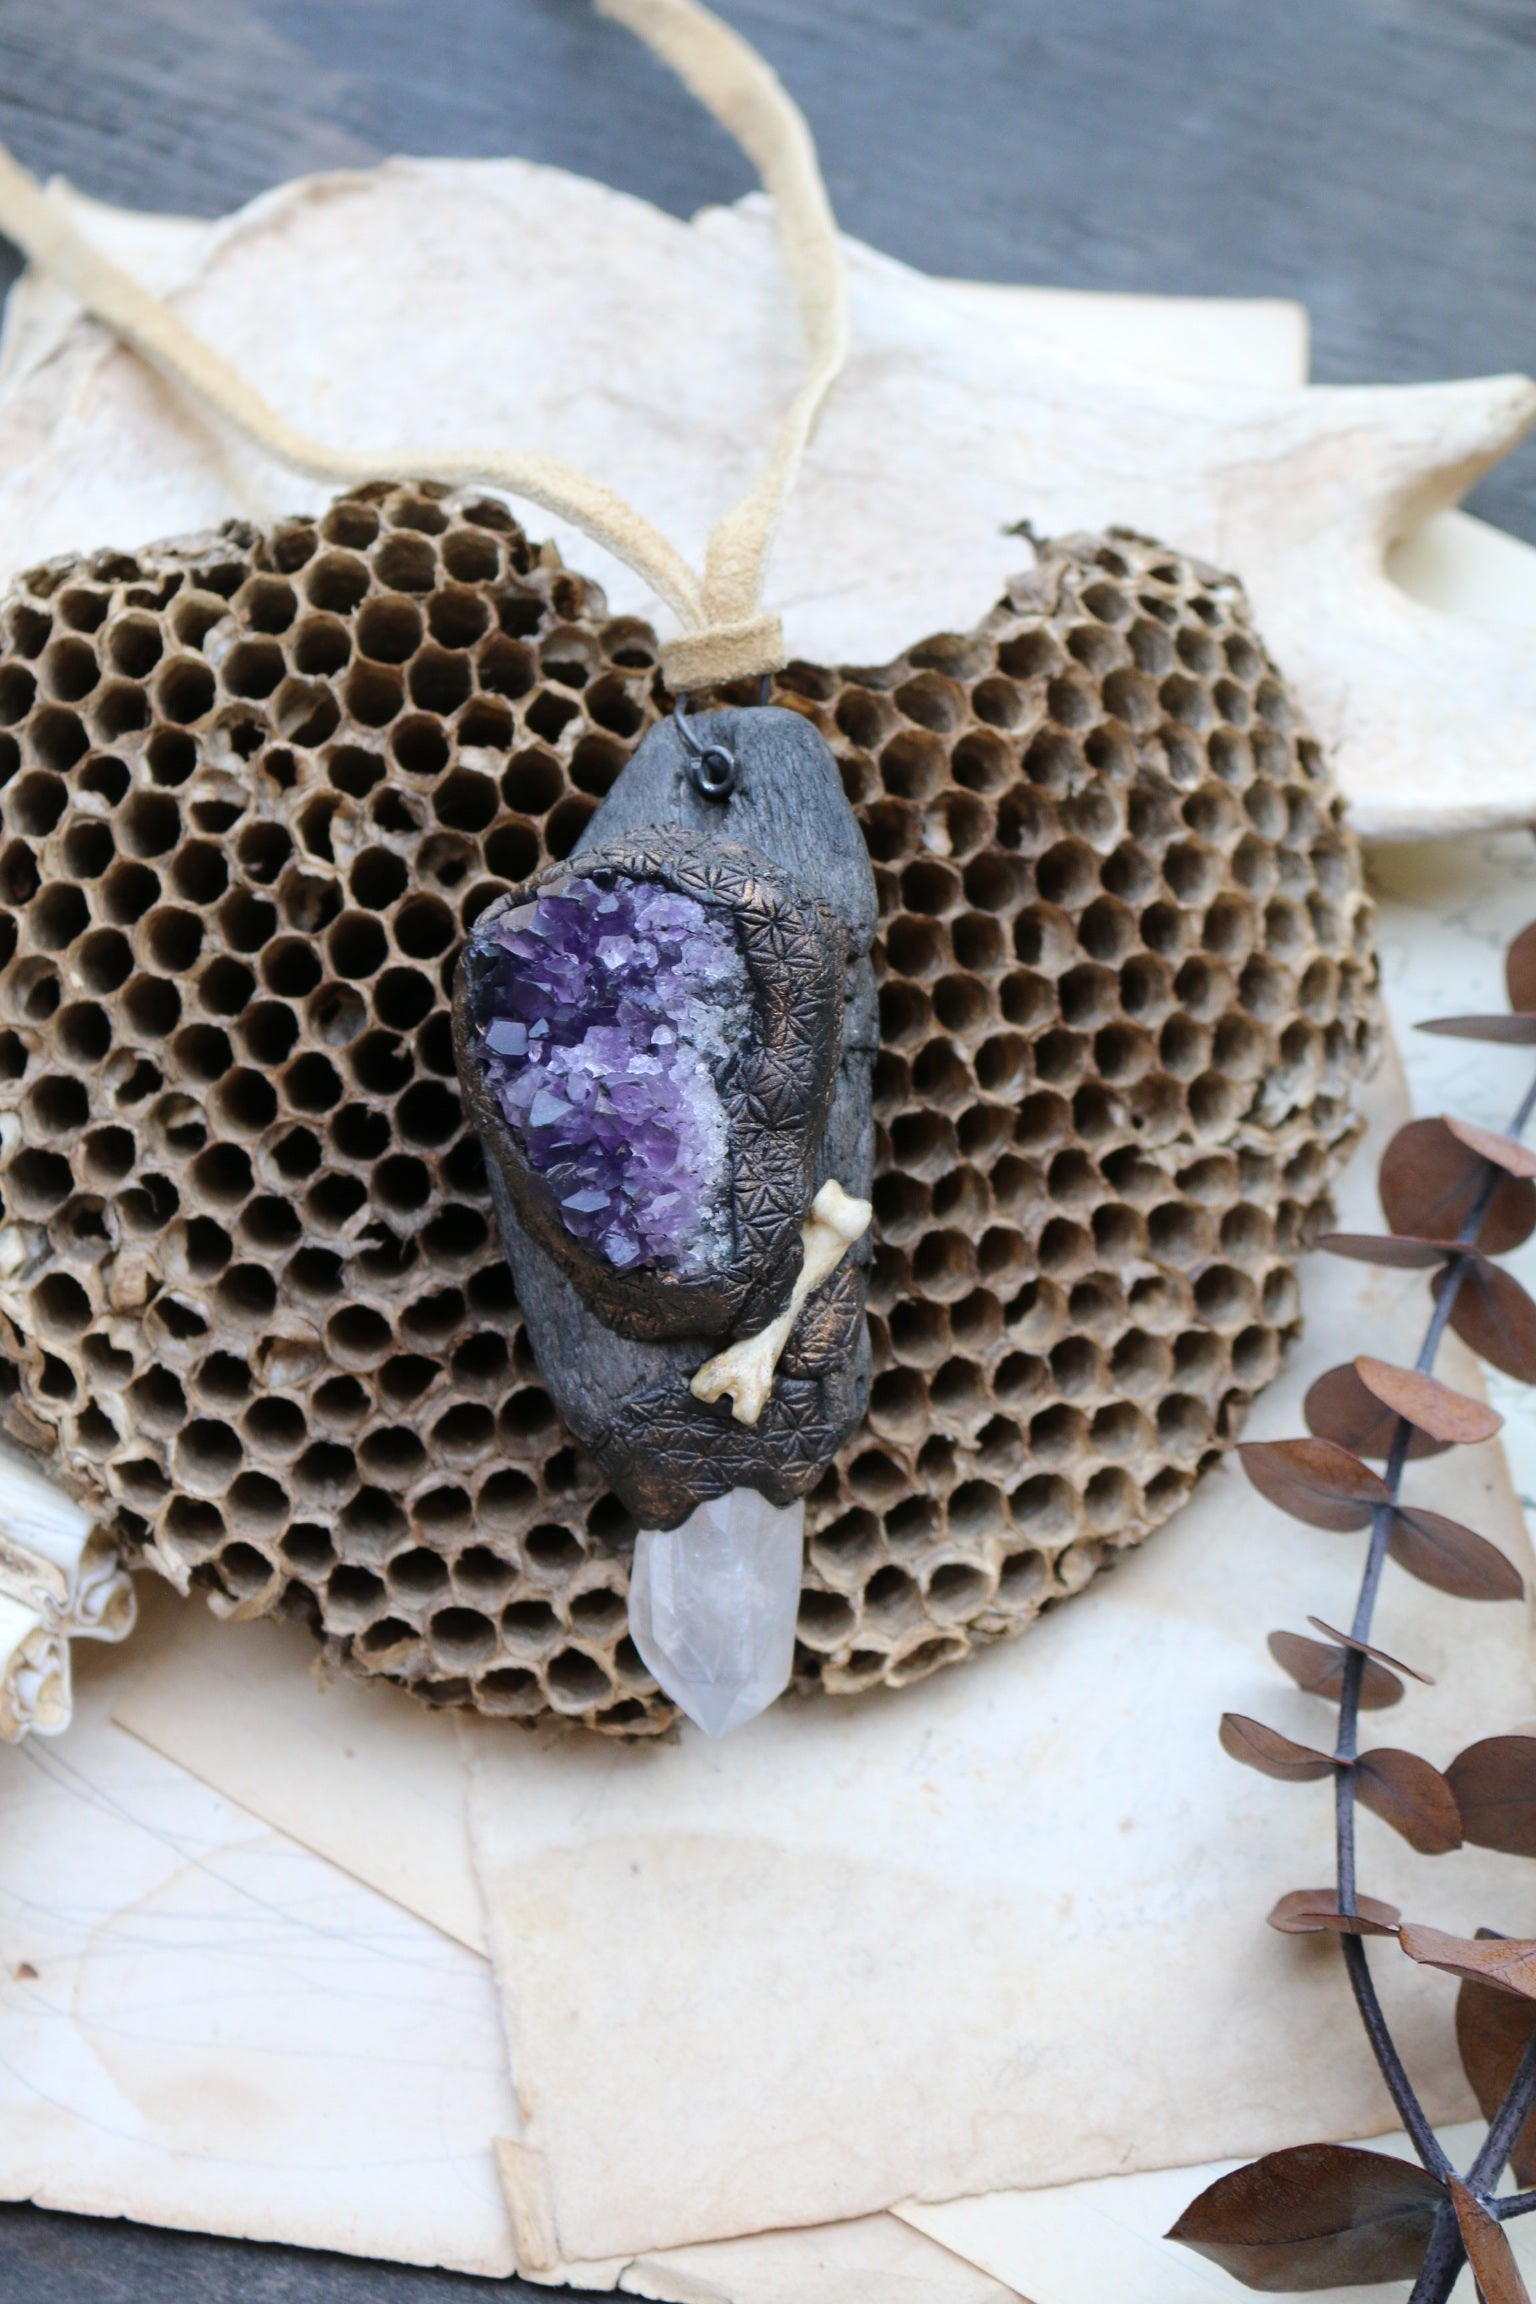 Driftwood Necklace with Amethyst, Bone, Quartz Crystal + the Flower of Life